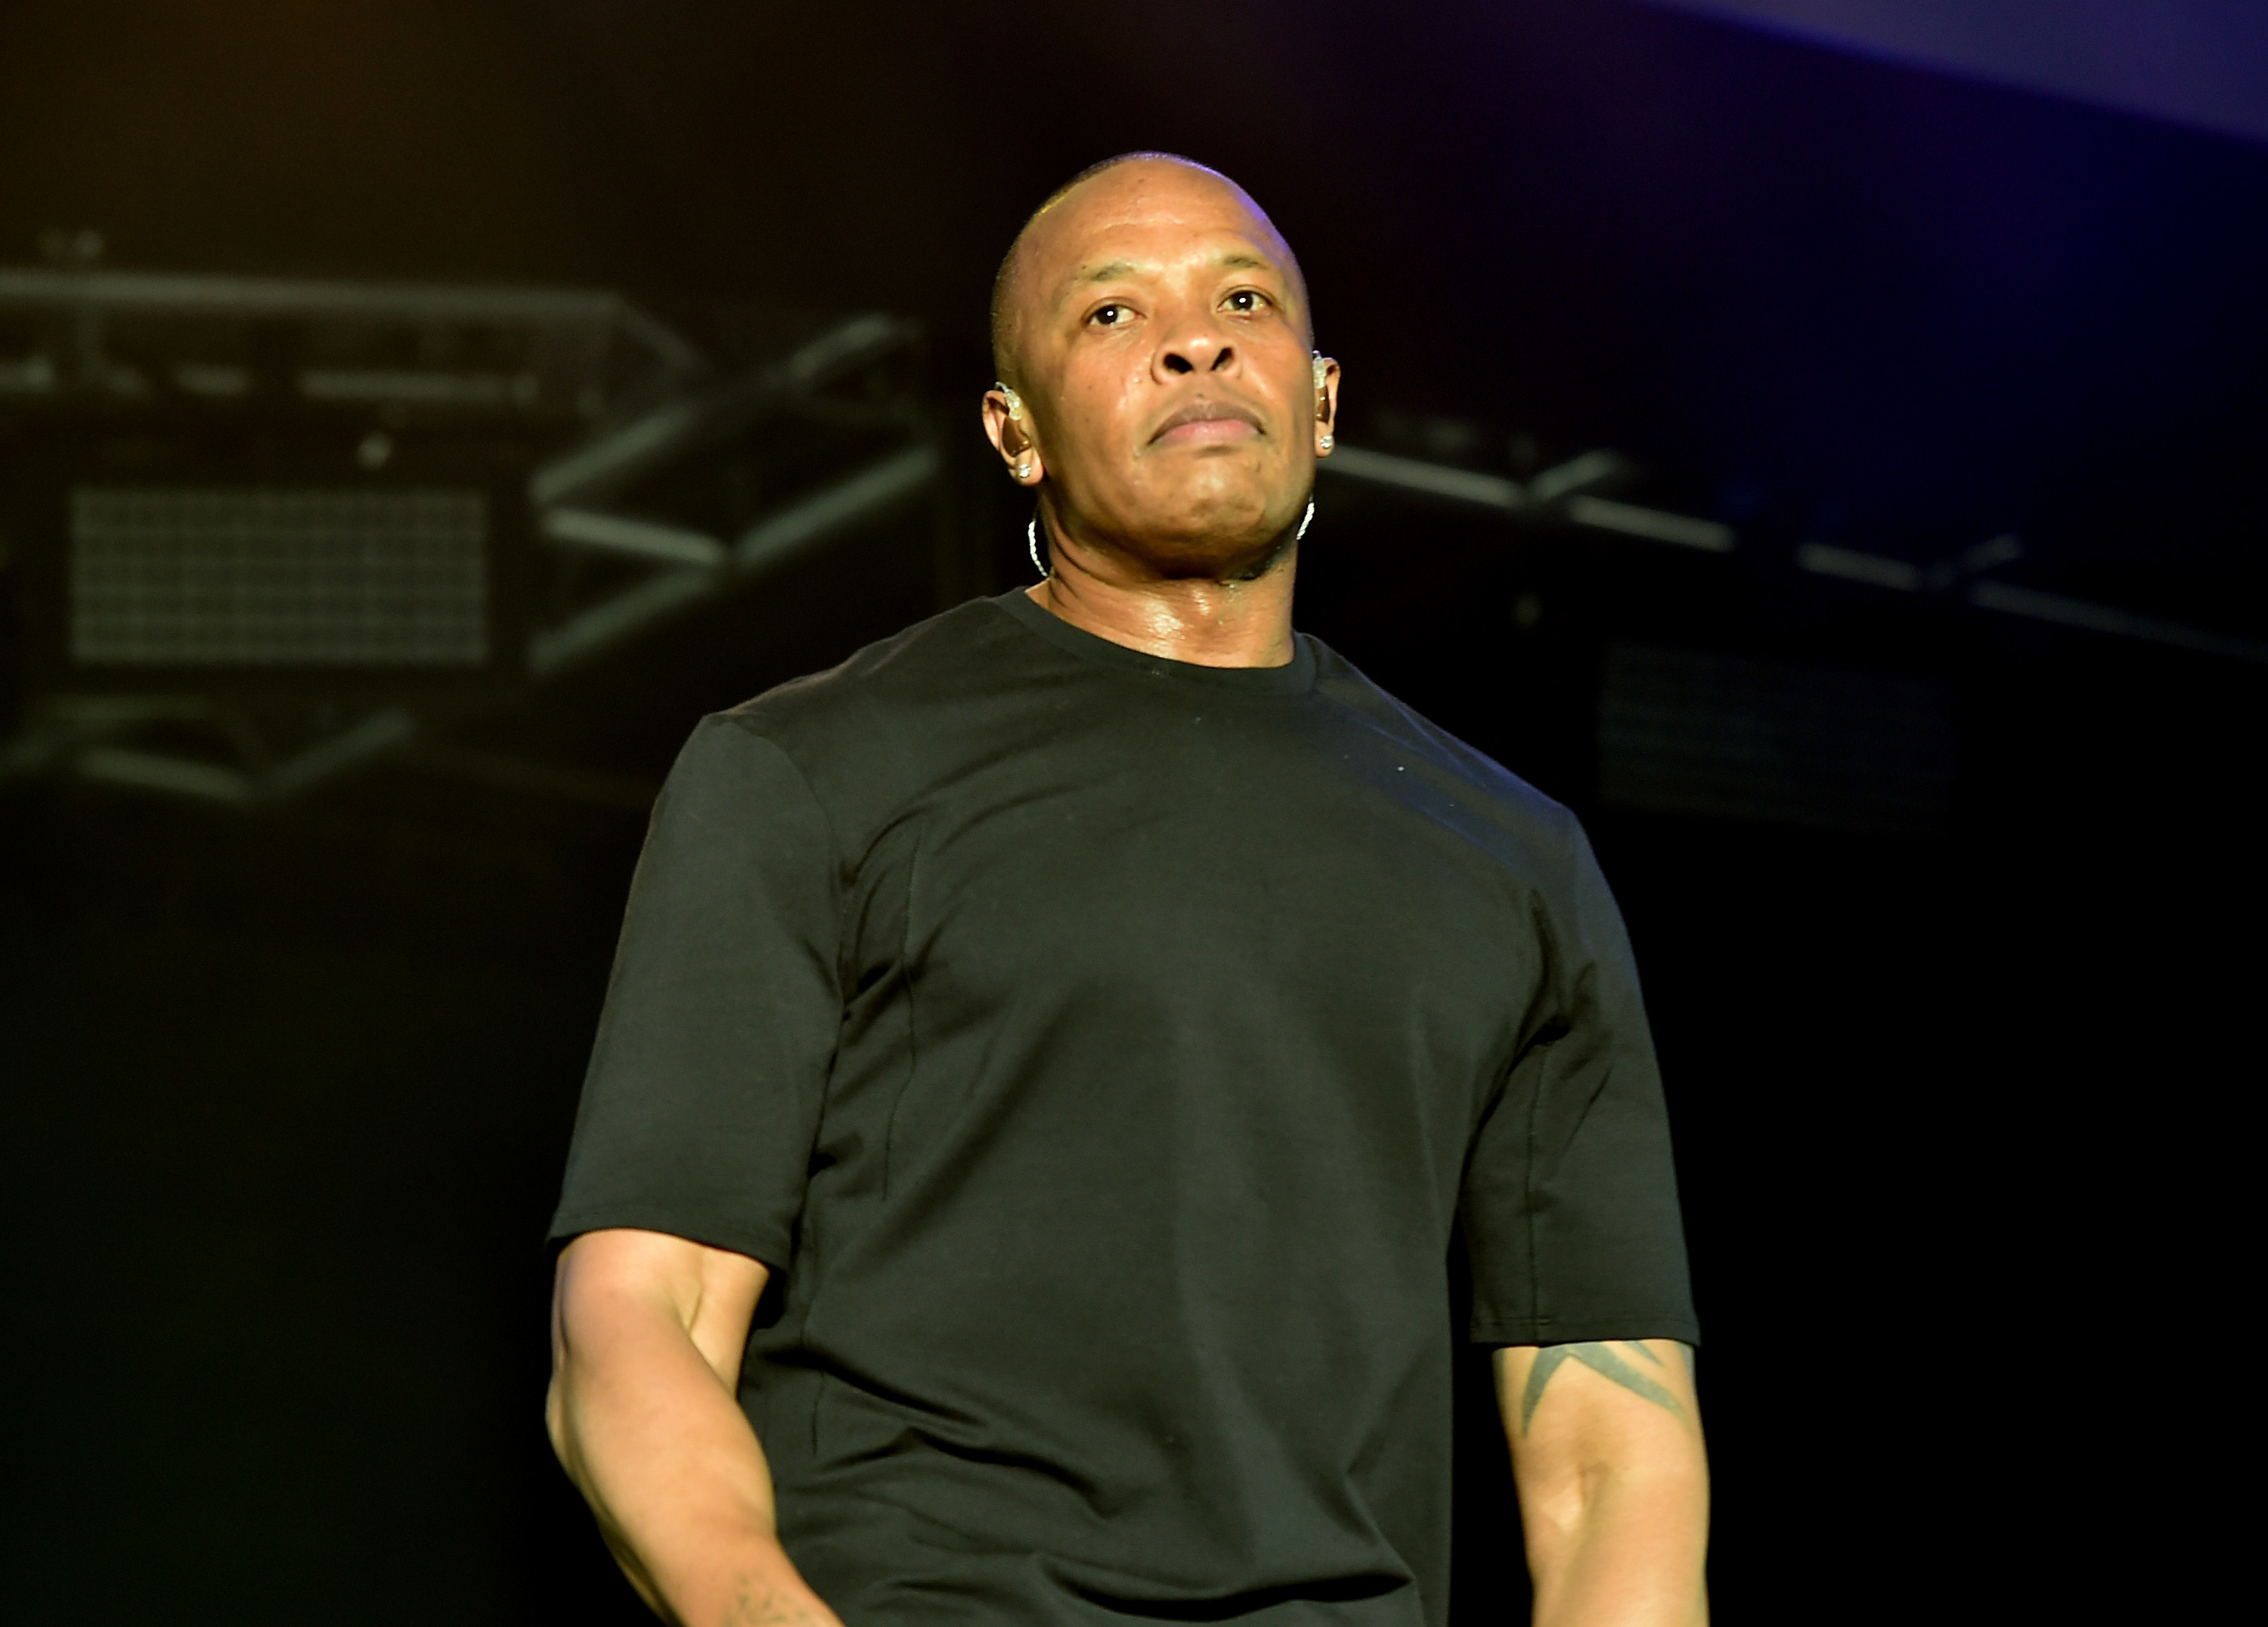 Recording artist Dr. Dre  performs onstage during day 2 of the 2016 Coachella Valley Music &amp; Arts Festival Weekend 2 at the Empire Polo Club on April 23, 2016 in Indio, California.